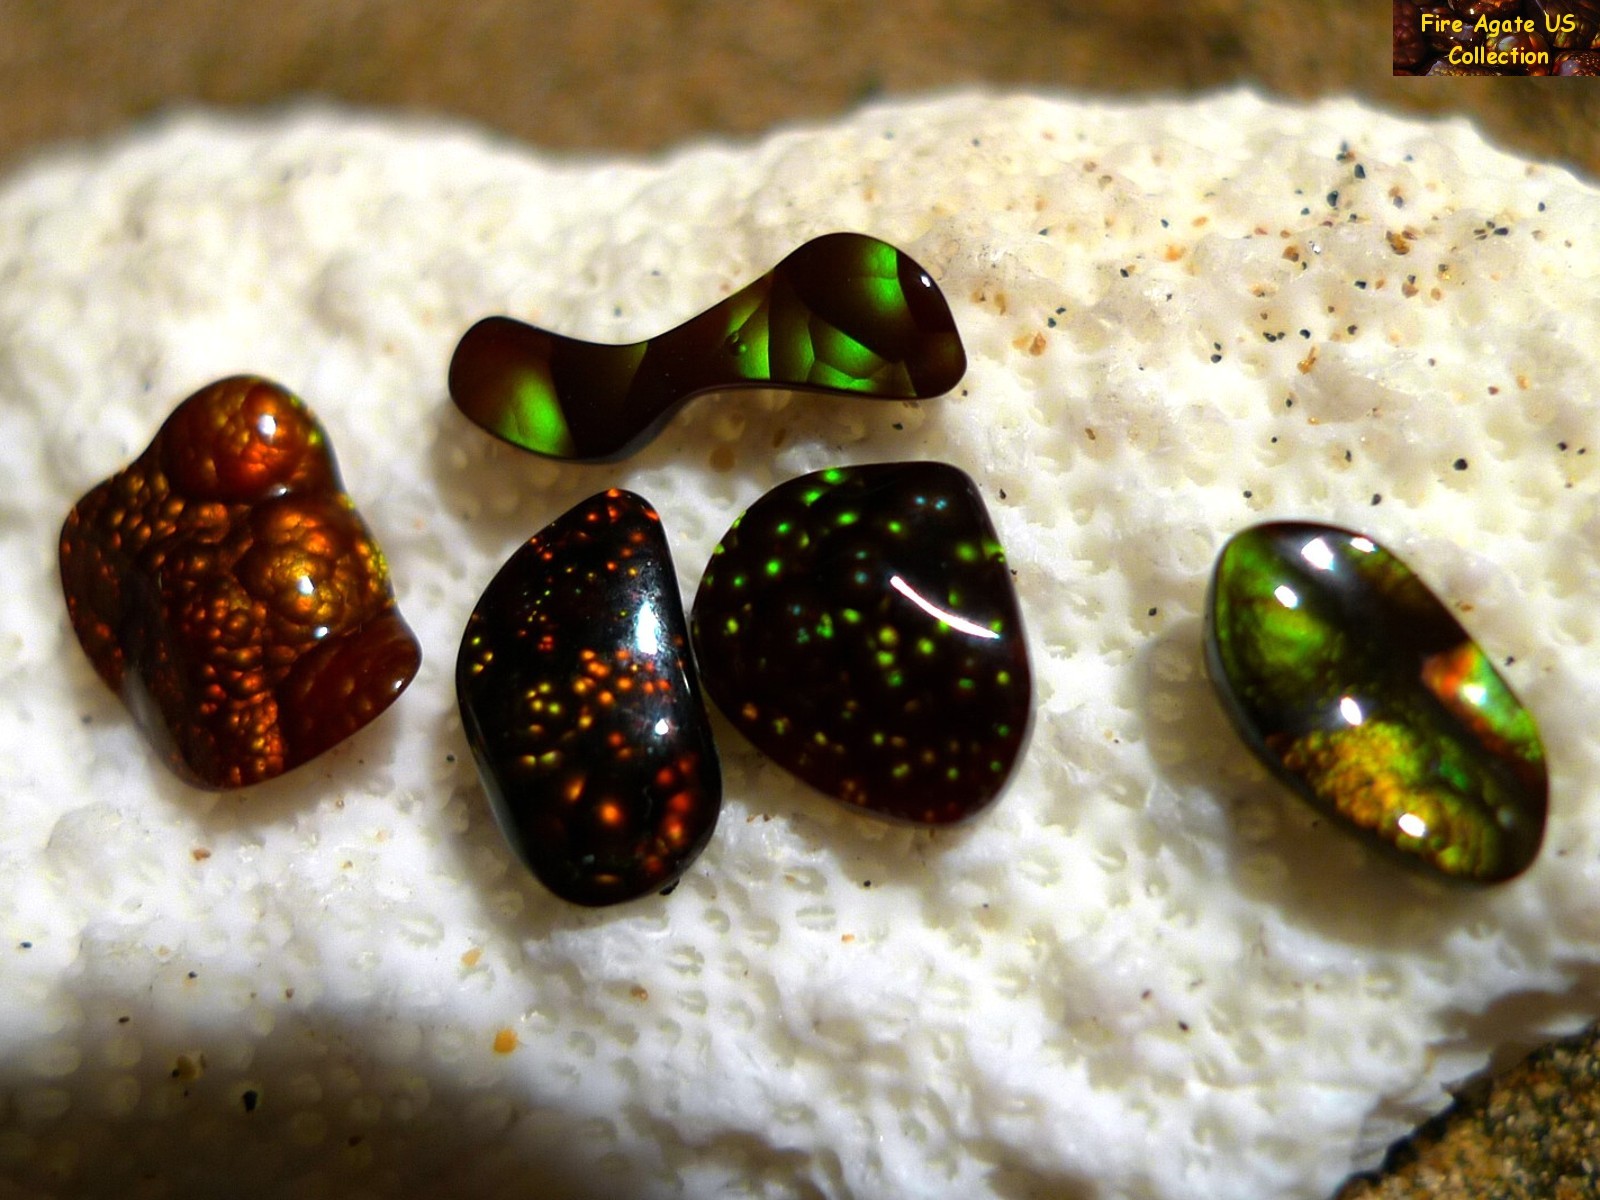 Group of Five Fire Agate Cabochons 4.6 Total Carat Weight Deer Creek Slaughter Mountain Arizona Gems SLG068 Photo 7